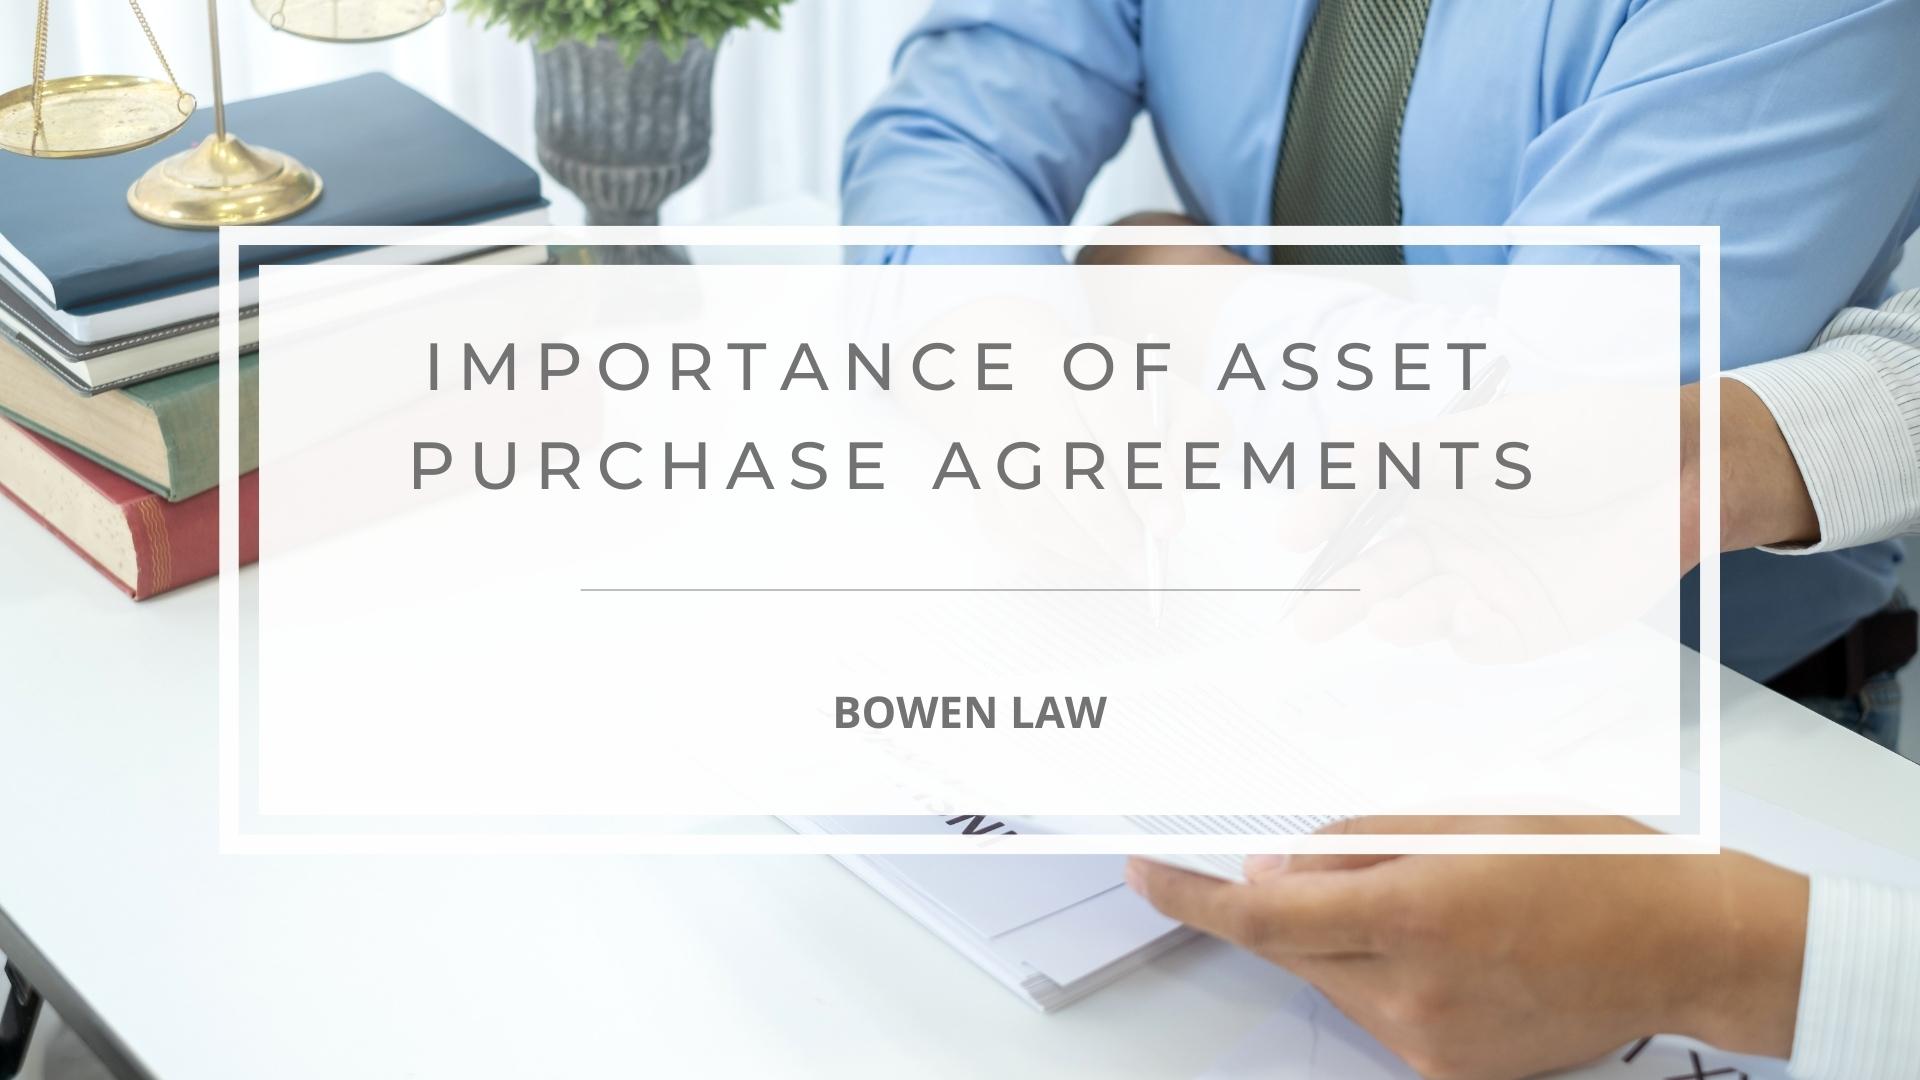 Featured image of the importance of asset purchase agreements